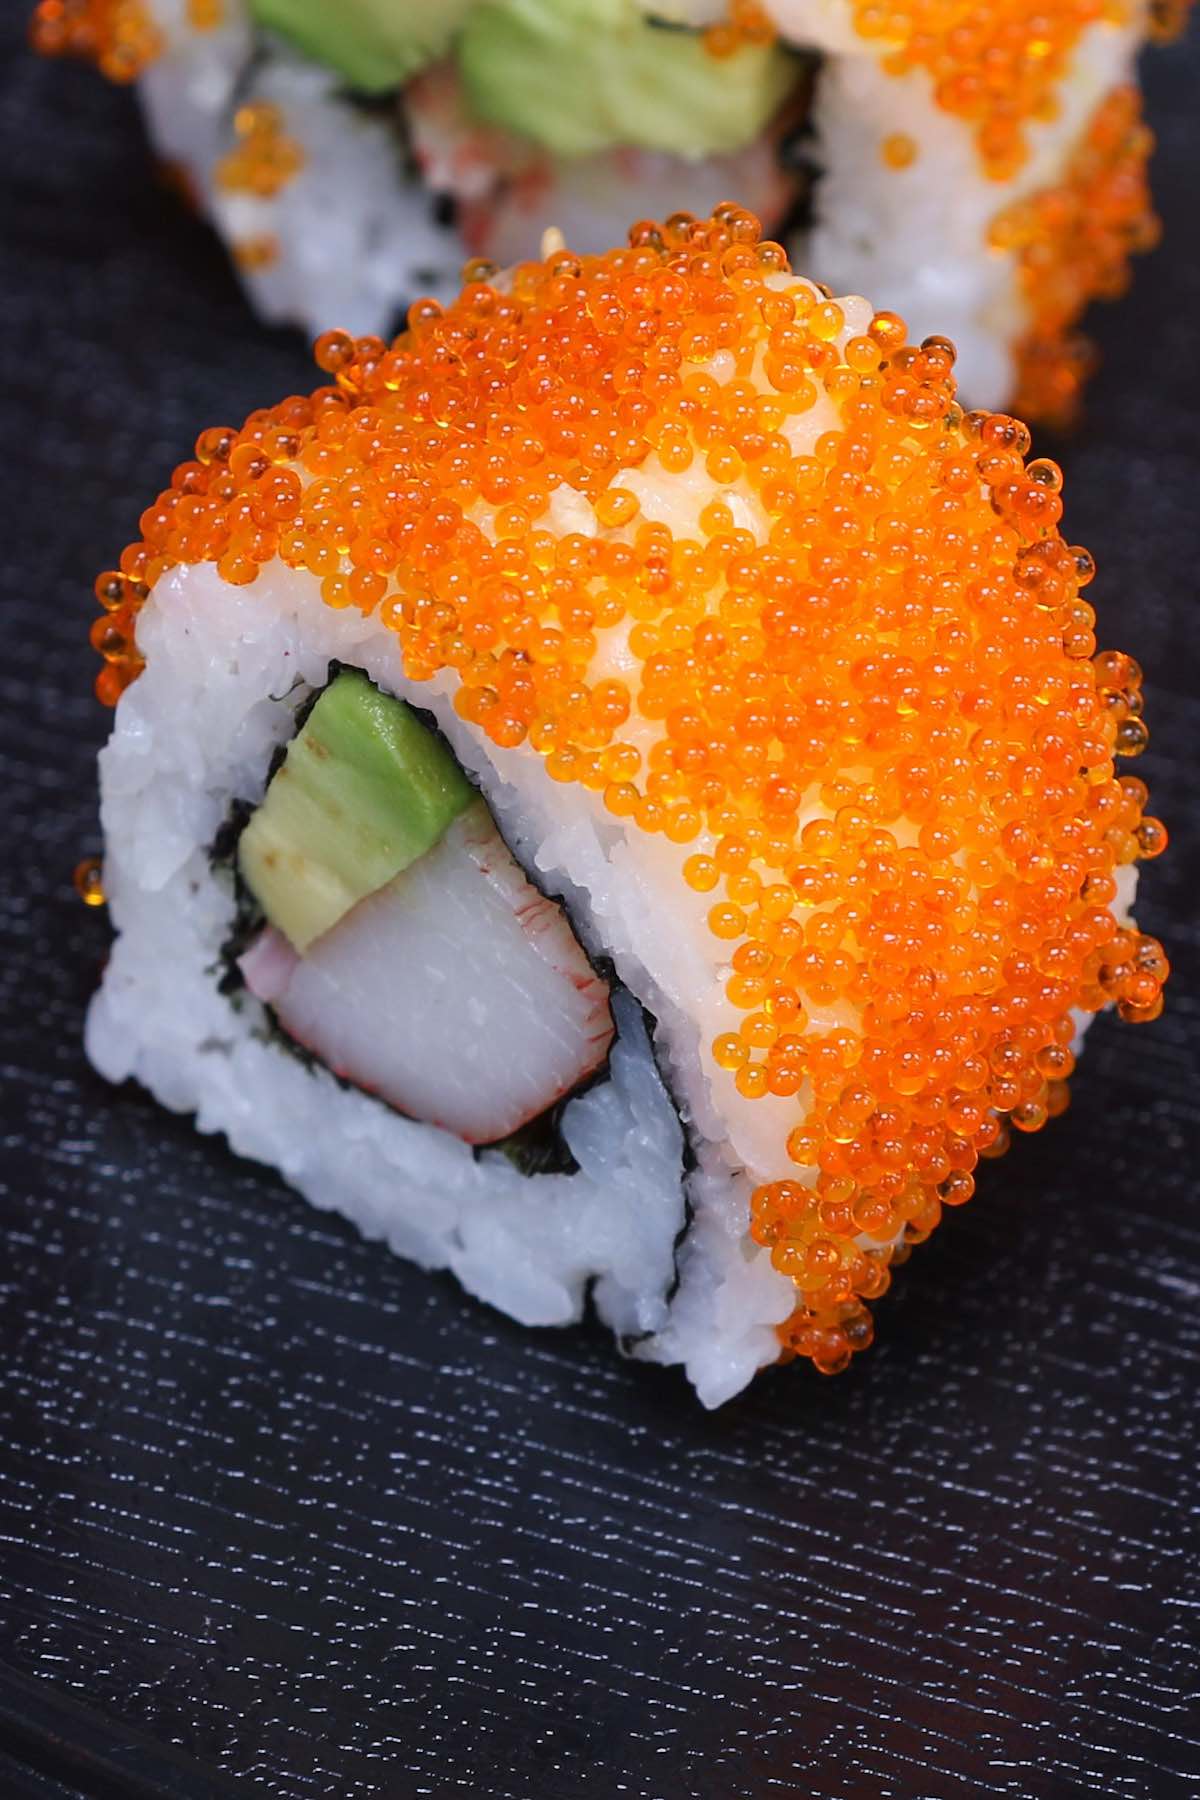 Masago is the roe of capelin, a fish in the smelt family. It’s a popular ingredient in Japanese cuisine because of its distinct taste. Masago eggs are very small, and often used as a topping in a variety of sushi recipes. In this post you’ll learn everything about masago and how to make masago sushi rolls. #masago #MasagoSushi